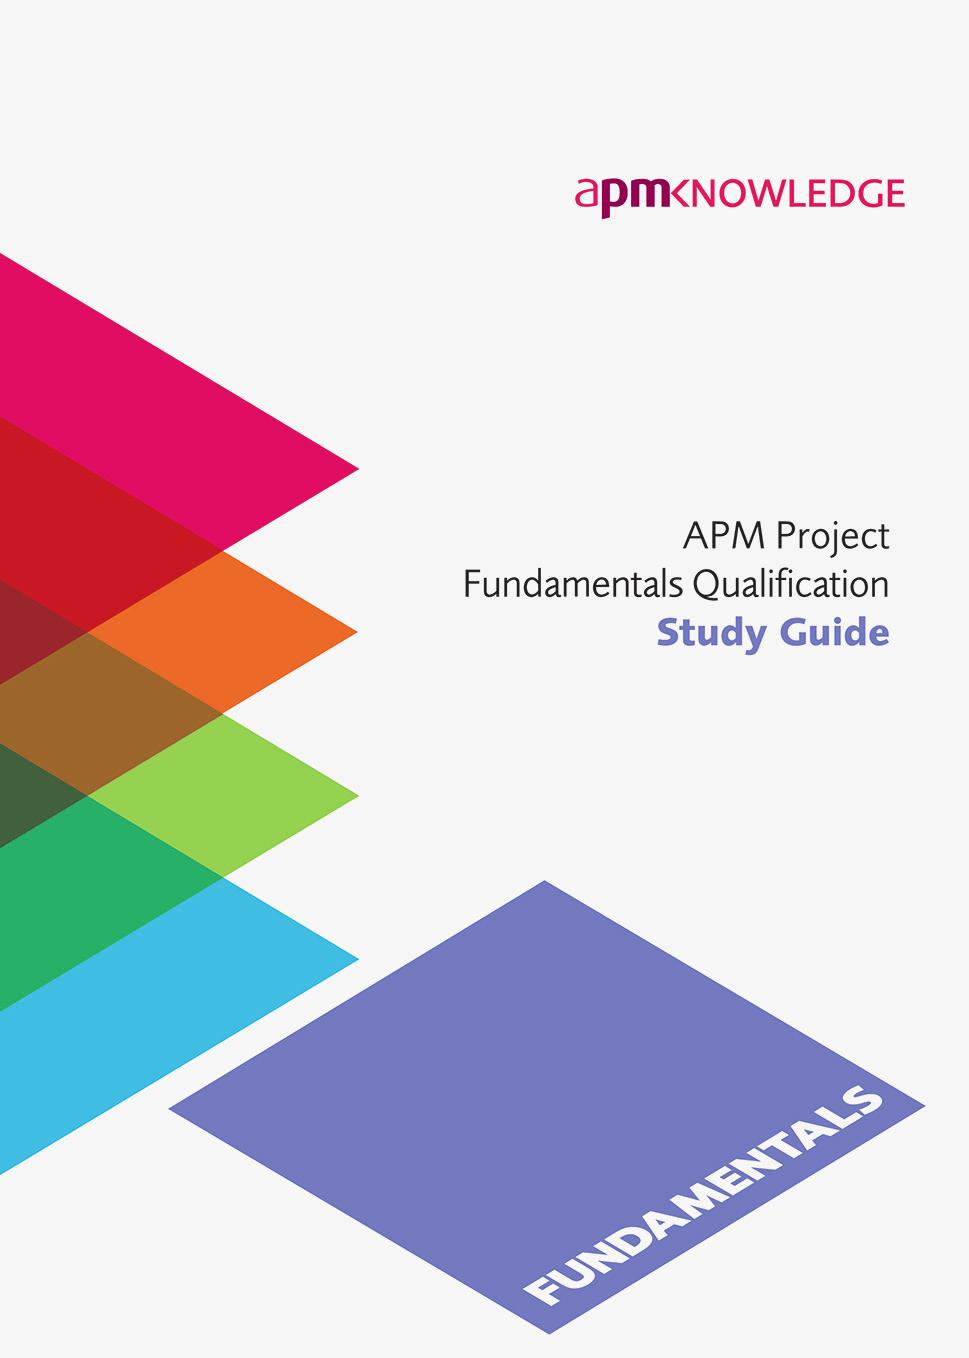 Study guides available APM Project Fundamentals Qualification A clearly defined set of learning objectives at the start of each section.